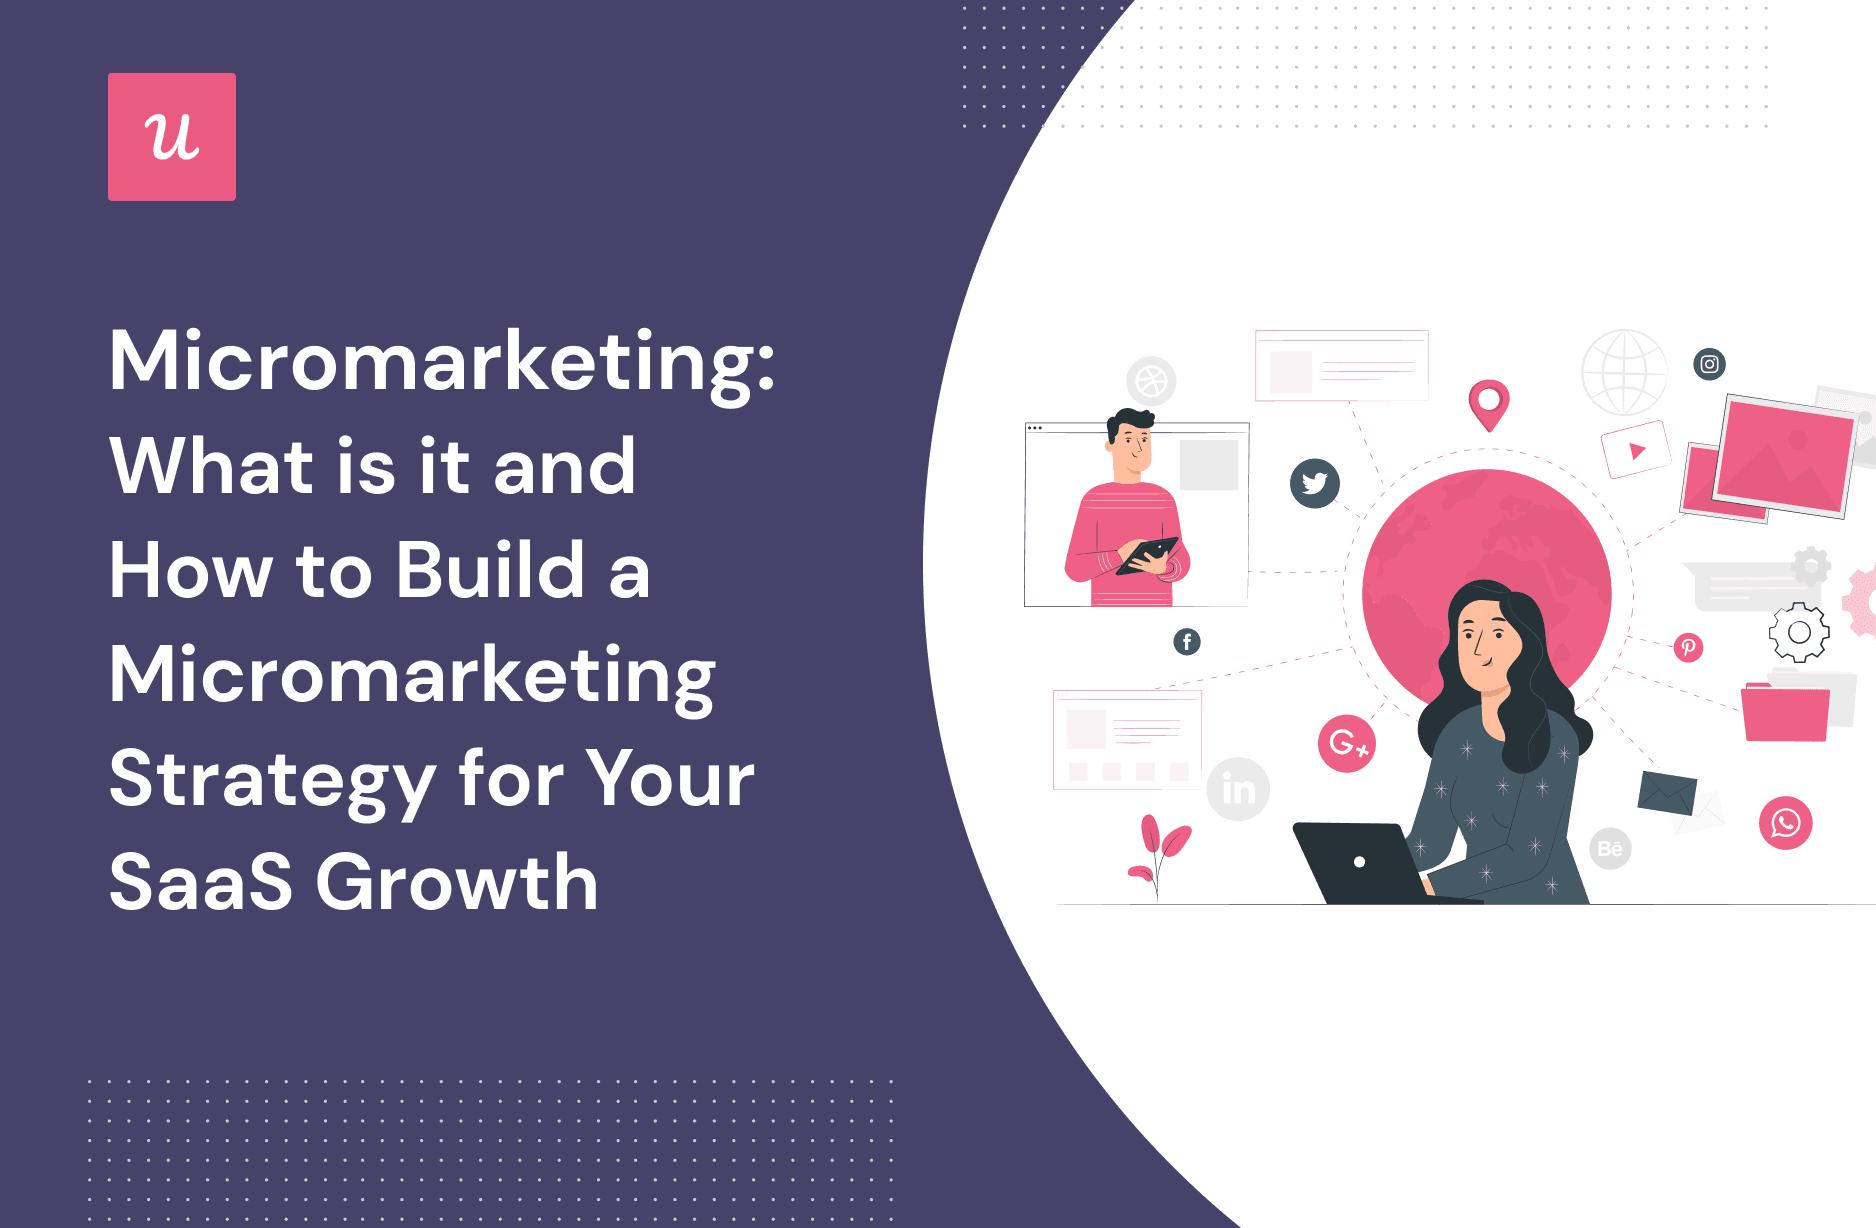 Micromarketing: What Is It and How To Build a Micromarketing Strategy for Your SaaS Growth